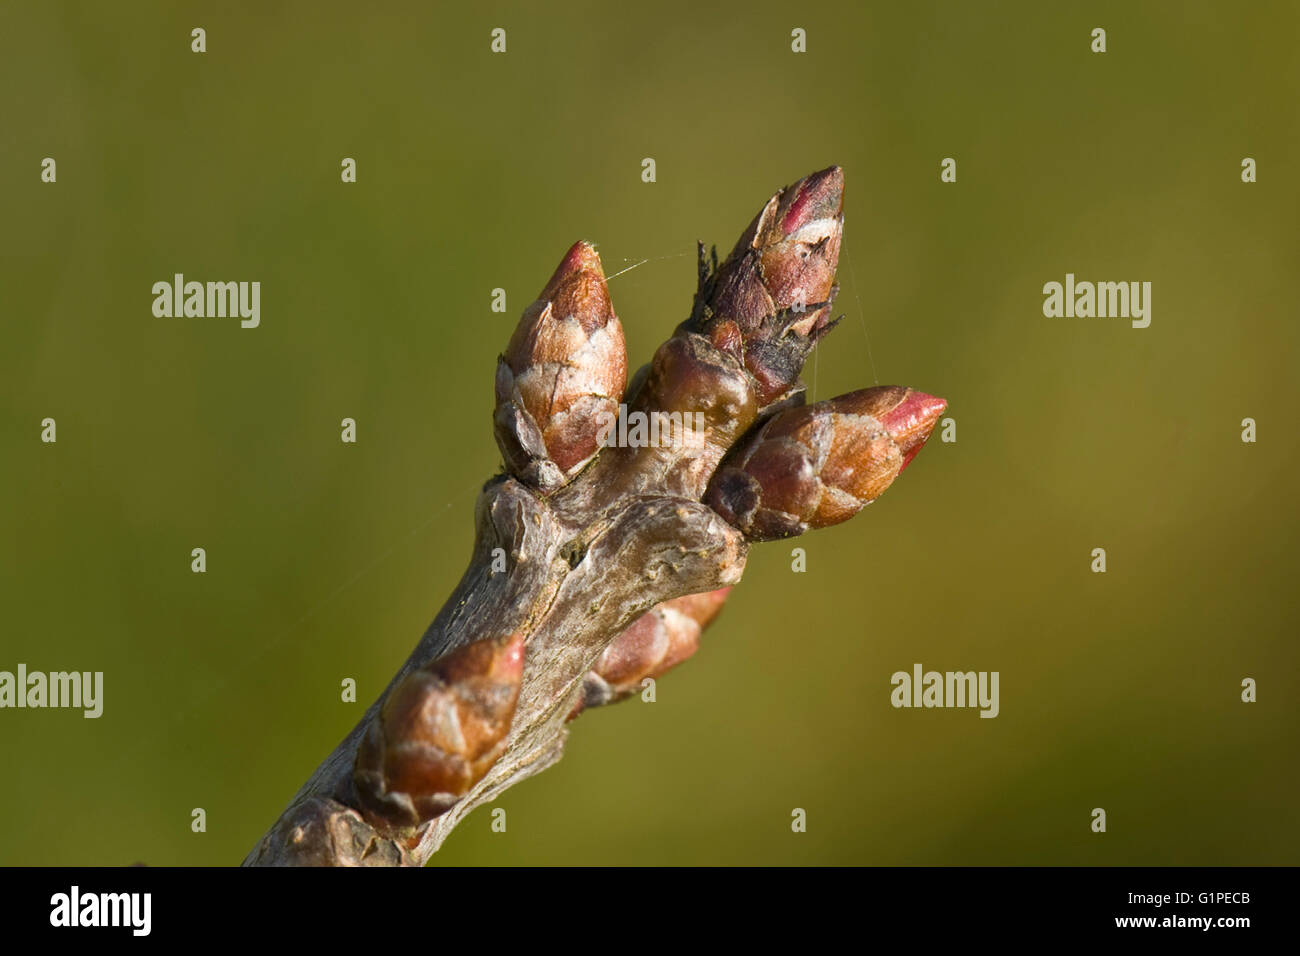 Swelling leaf and flower buds of a Victoria plum tree, Prunus domestica, in early spring, Berkshire, March Stock Photo